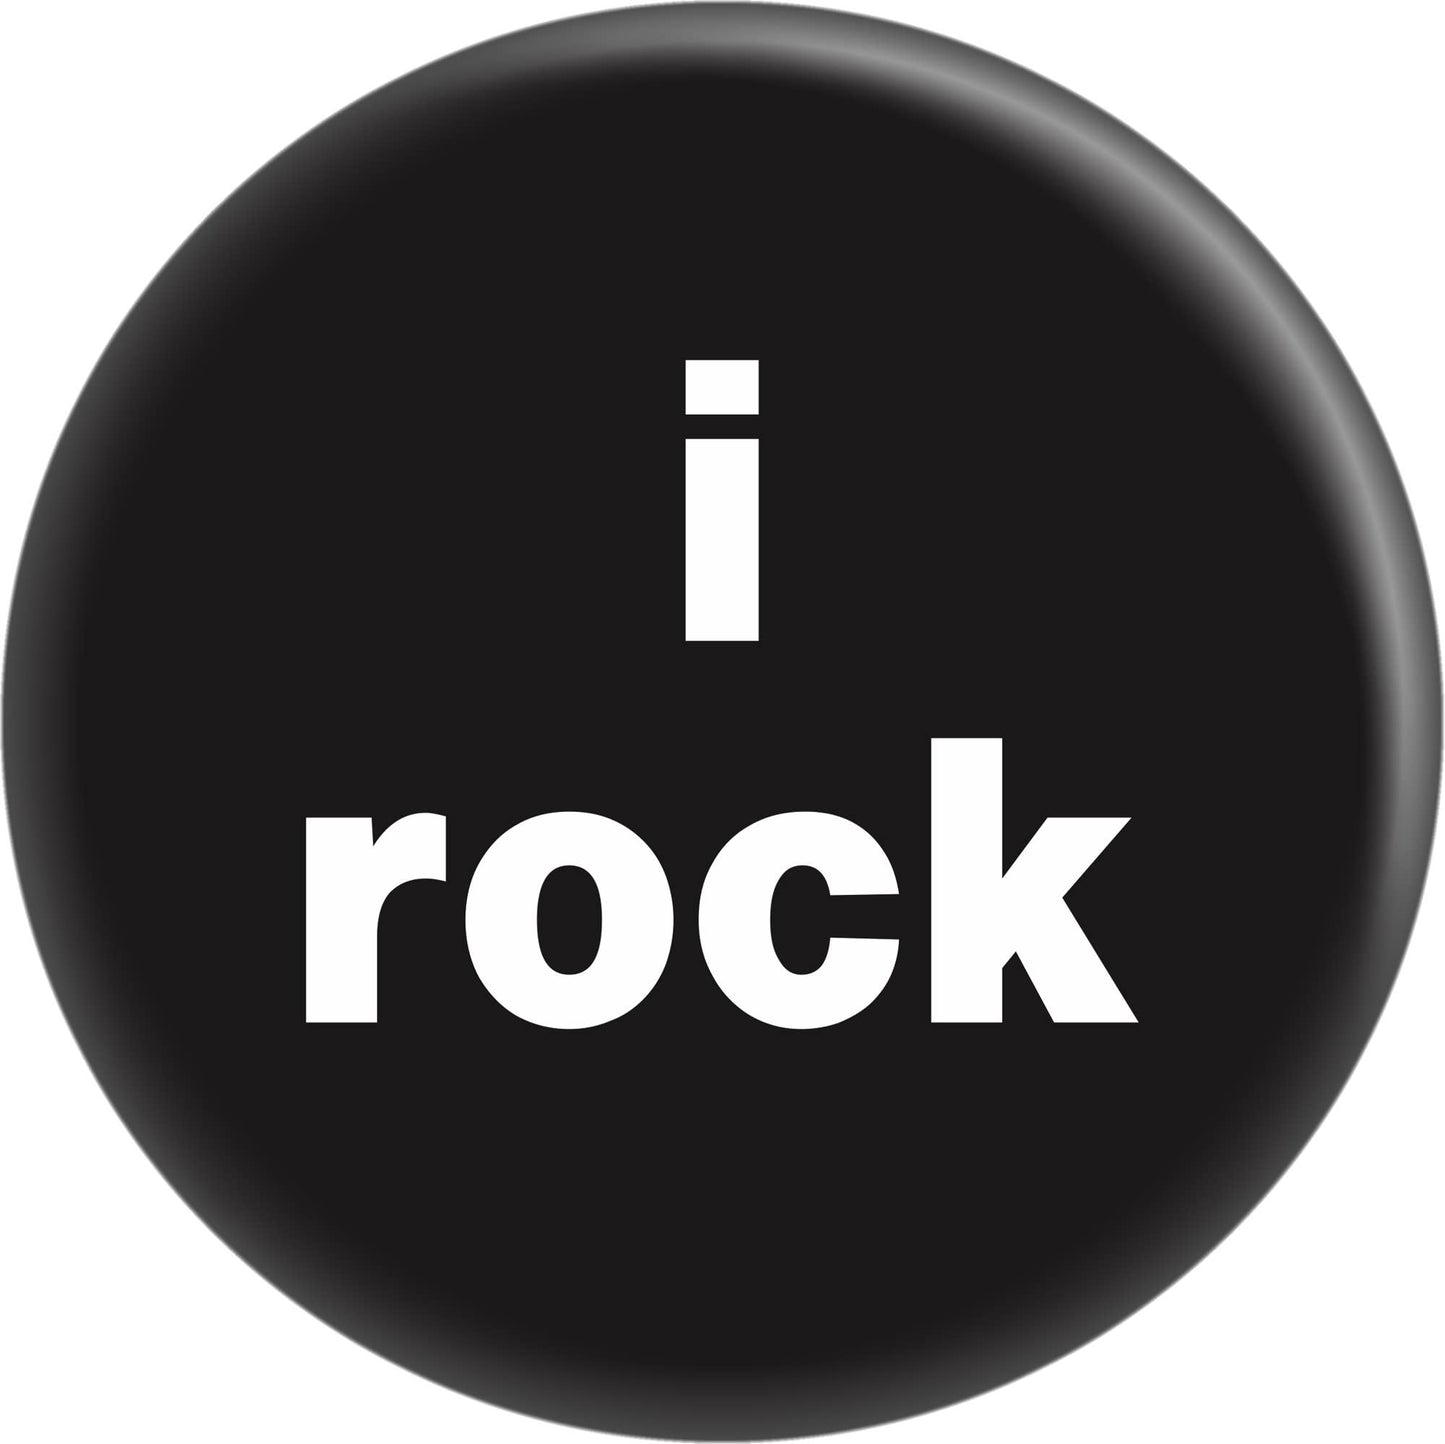 Pin-on Button - 1 Inch - "I Rock"